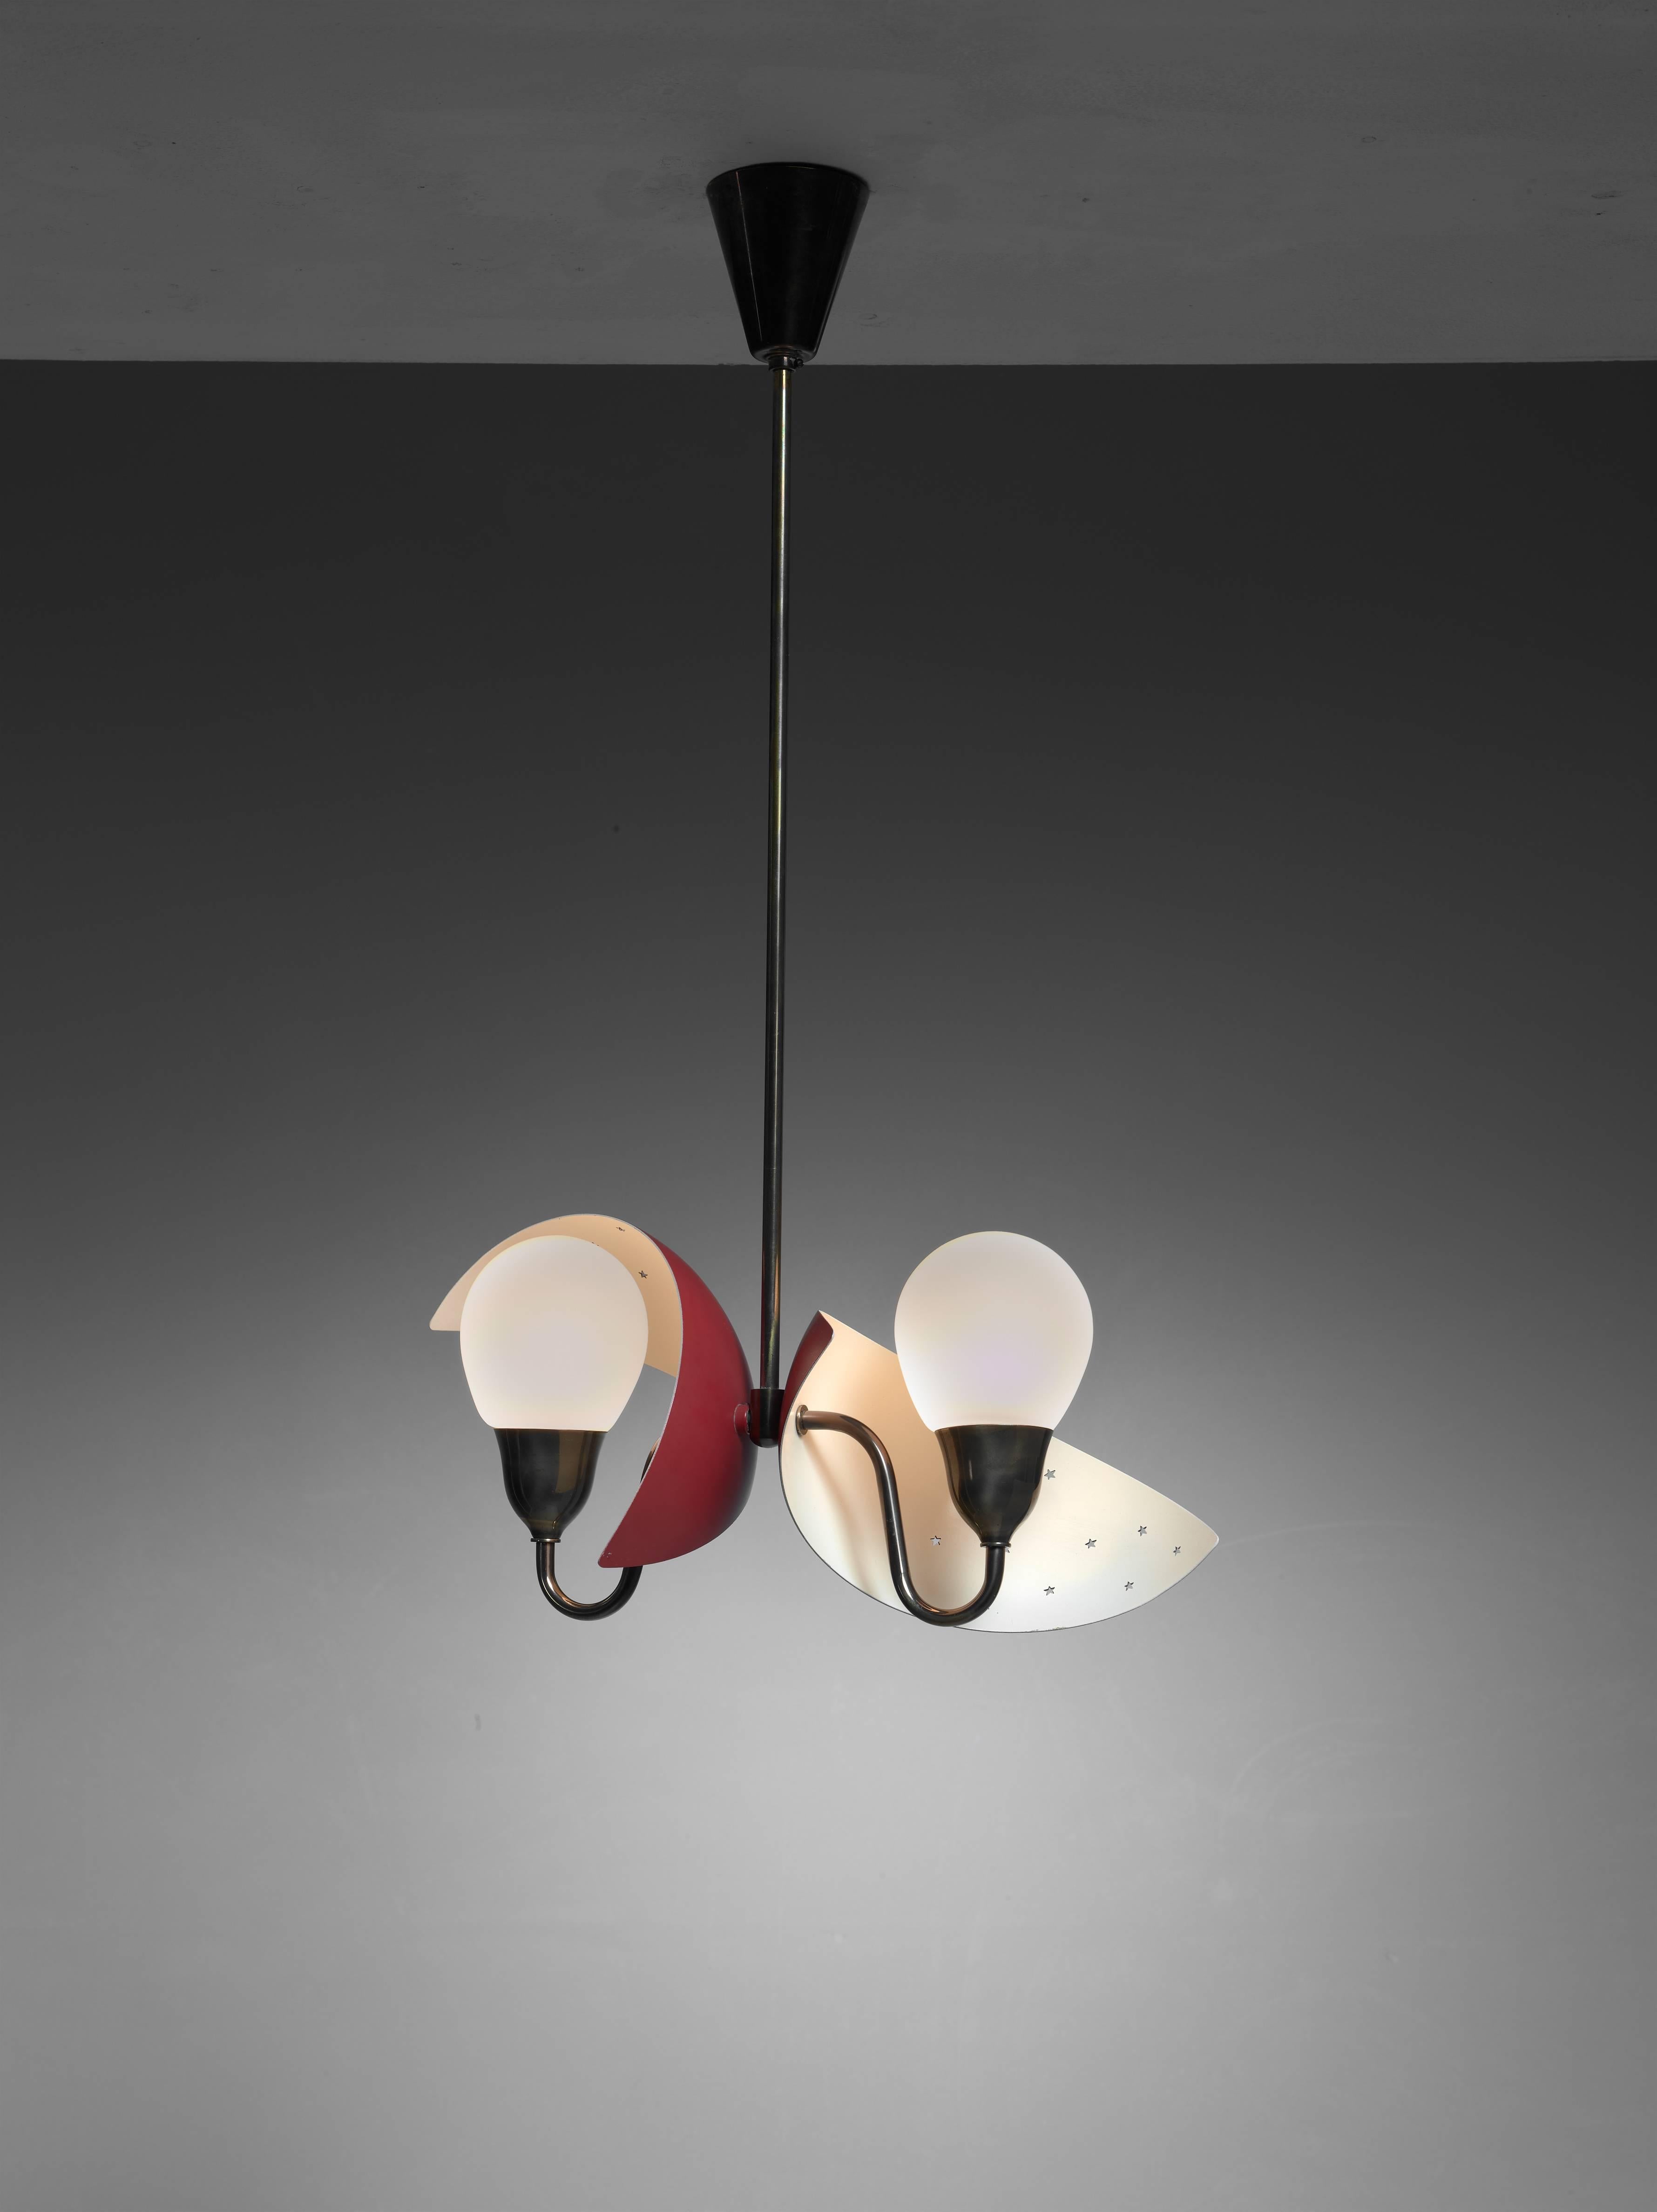 Lacquered Bent Karlby Adjustable Pendant, Denmark, 1950s